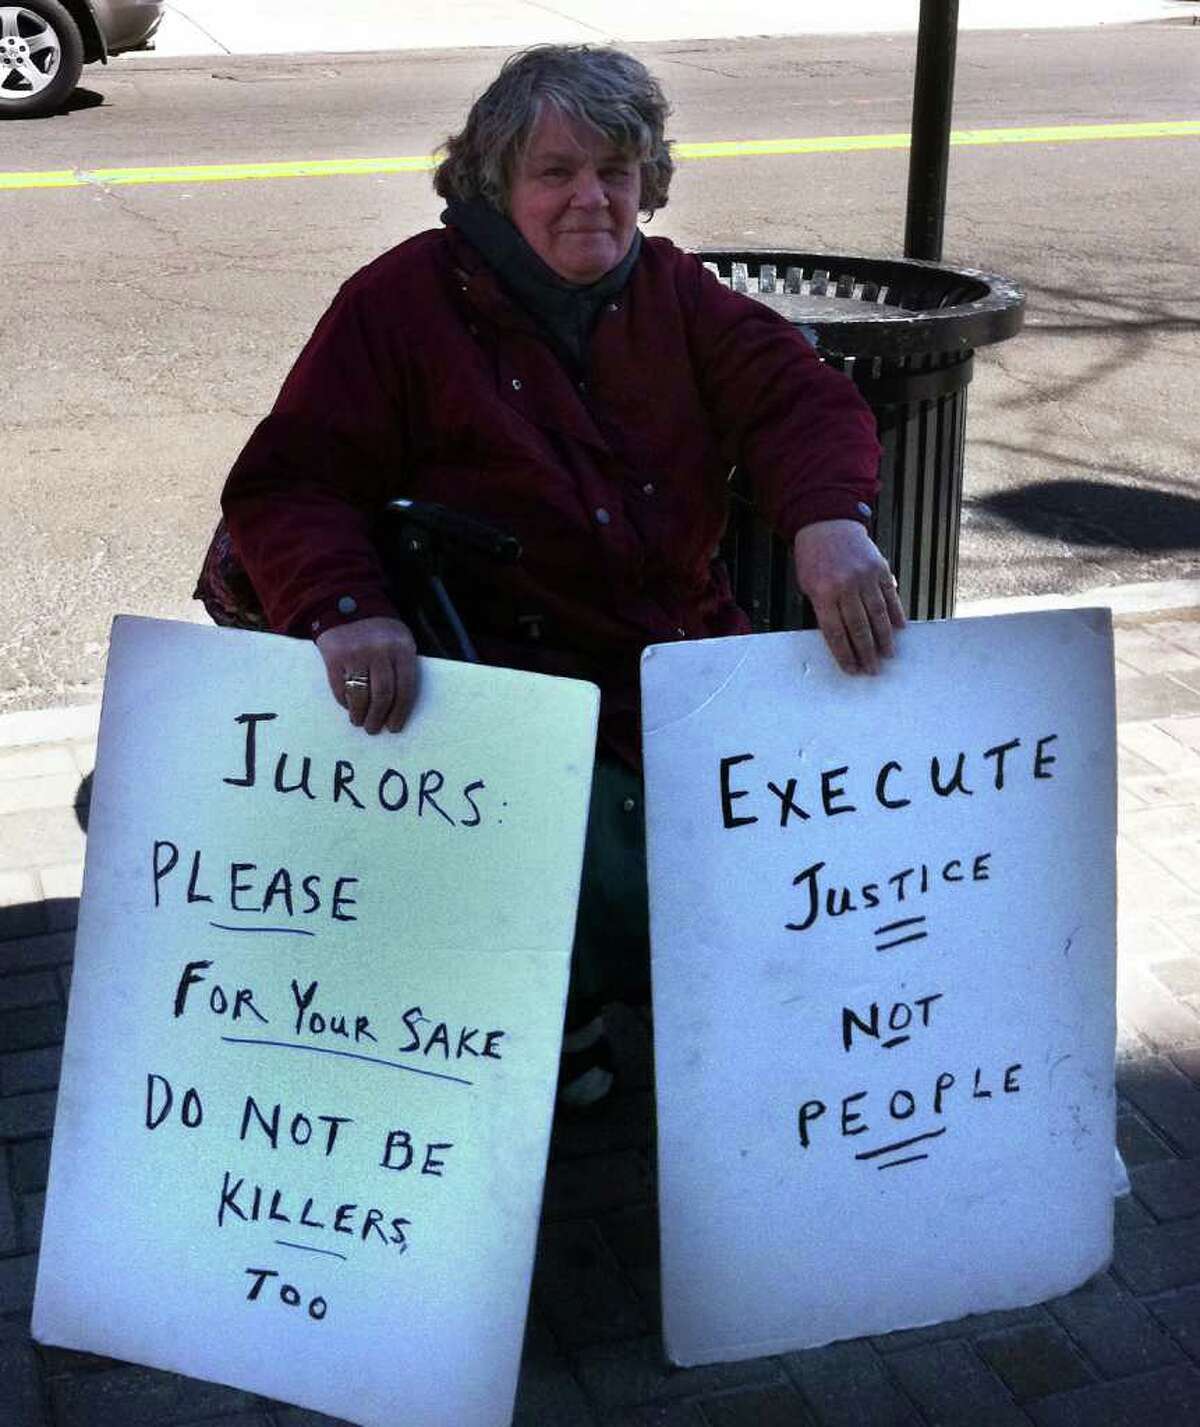 Clare Hogenauer, a retired N.Y. lawyer, protests outside Superior Court in Bridgeport, Conn. March 29th, 2011, where a jury deliberating the sentence of Christopher DiMeo.